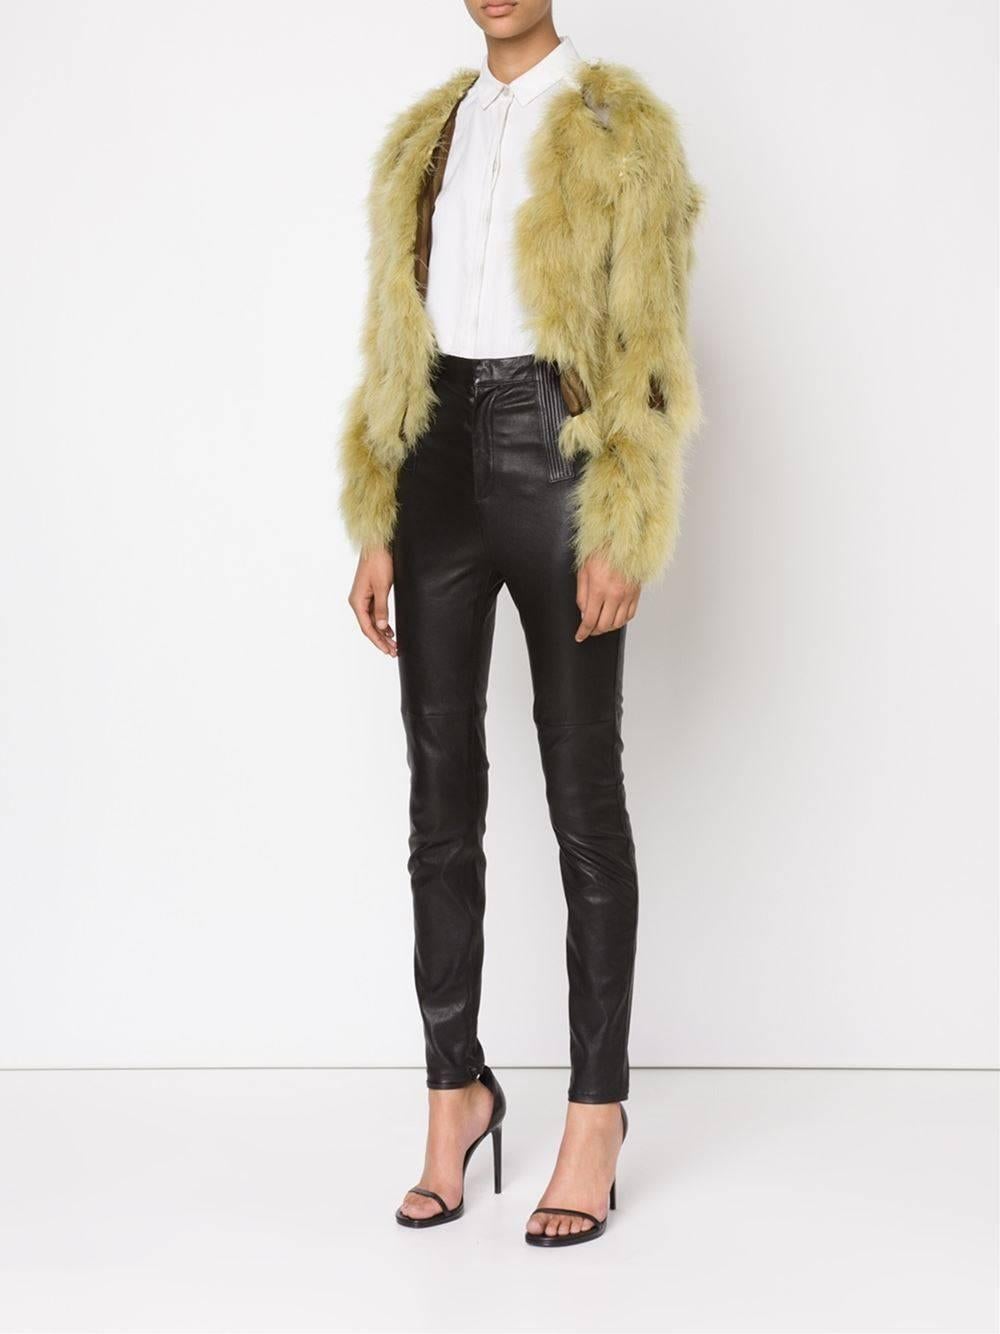 Cropped and frisky ostrich feather fur coat by Jean Paul Gaultier in lime green, this one stands out!

This jacket is ultralight, it weighs almost nothing. Made of diaphanous army green silk on which the fur is attached. A tie fastening at the round